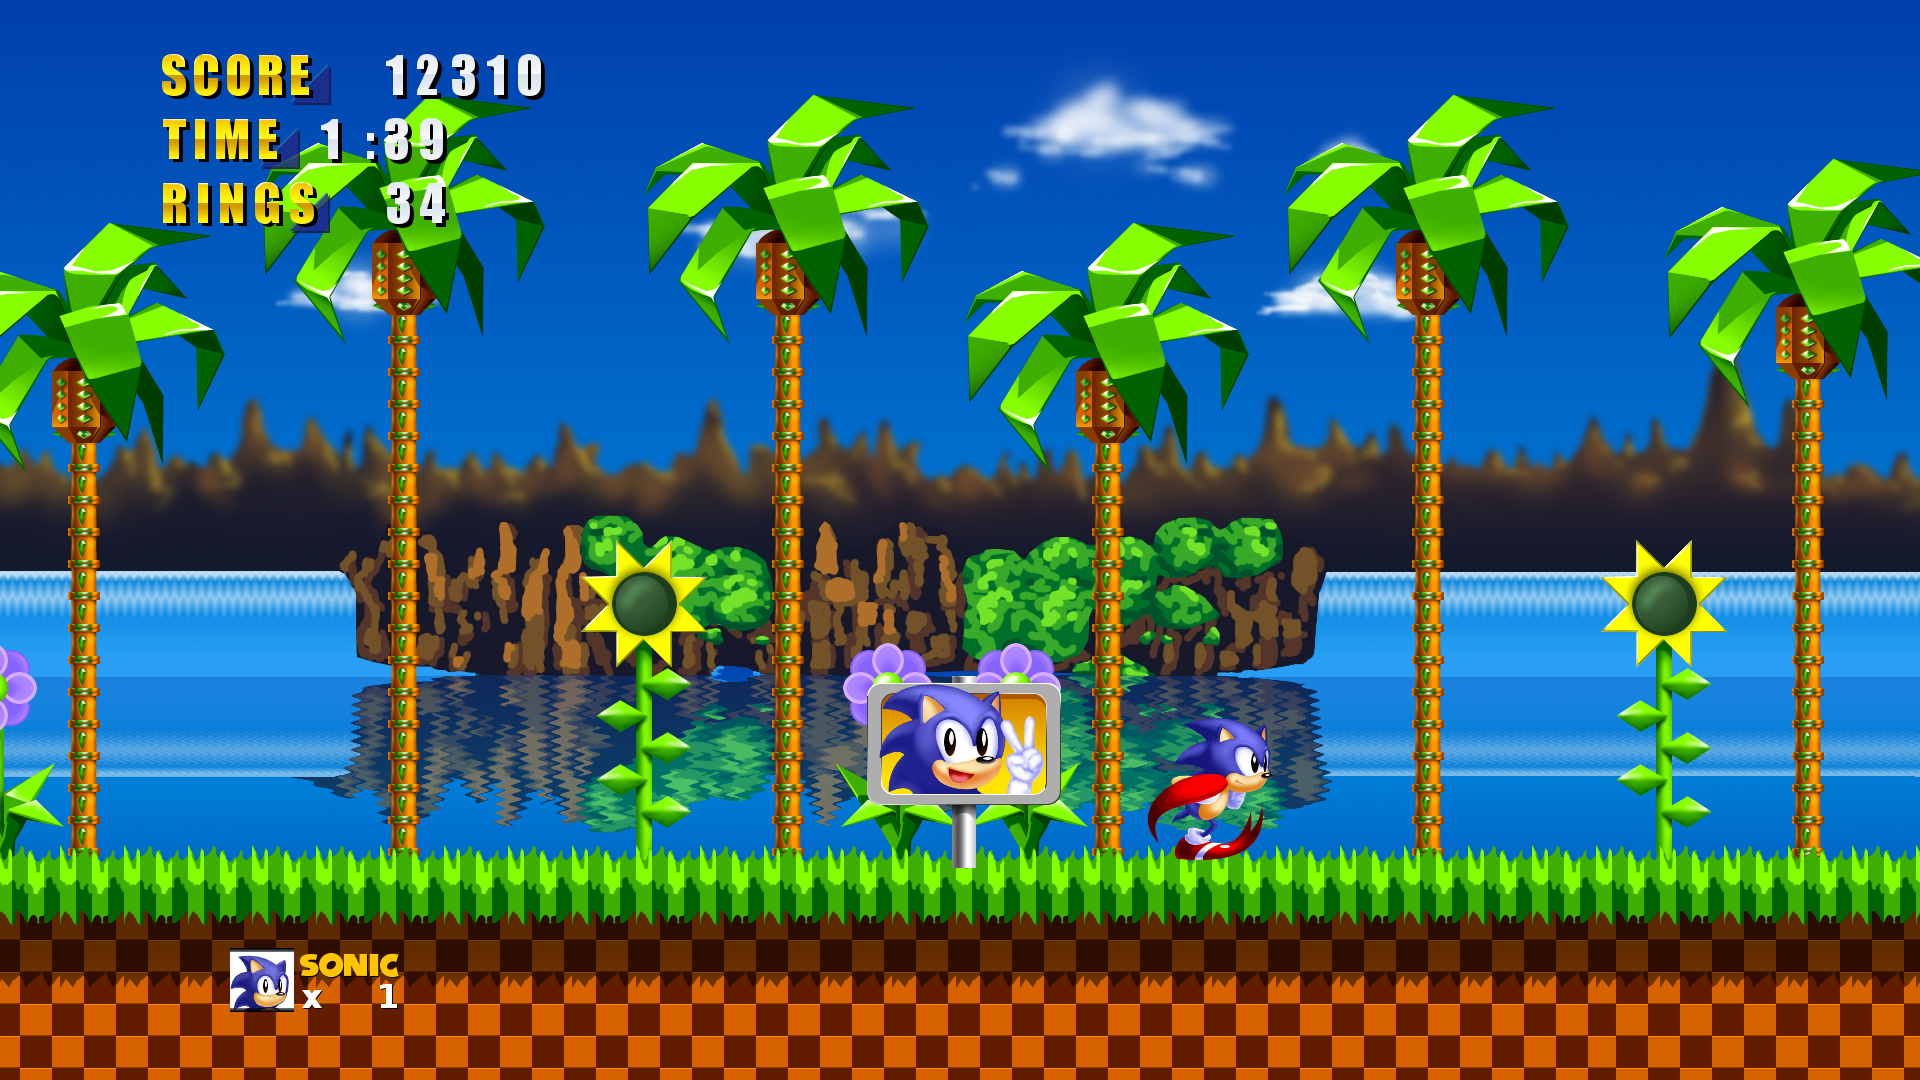 Free download Sonic 1 HD Green Hill Zone by Hyperchaotix [1920x1080] for your Desktop, Mobile & Tablet. Explore Sonic Generations Wallpaper HD. Sonic The Hedgehog Wallpaper, Sonic the Hedgehog